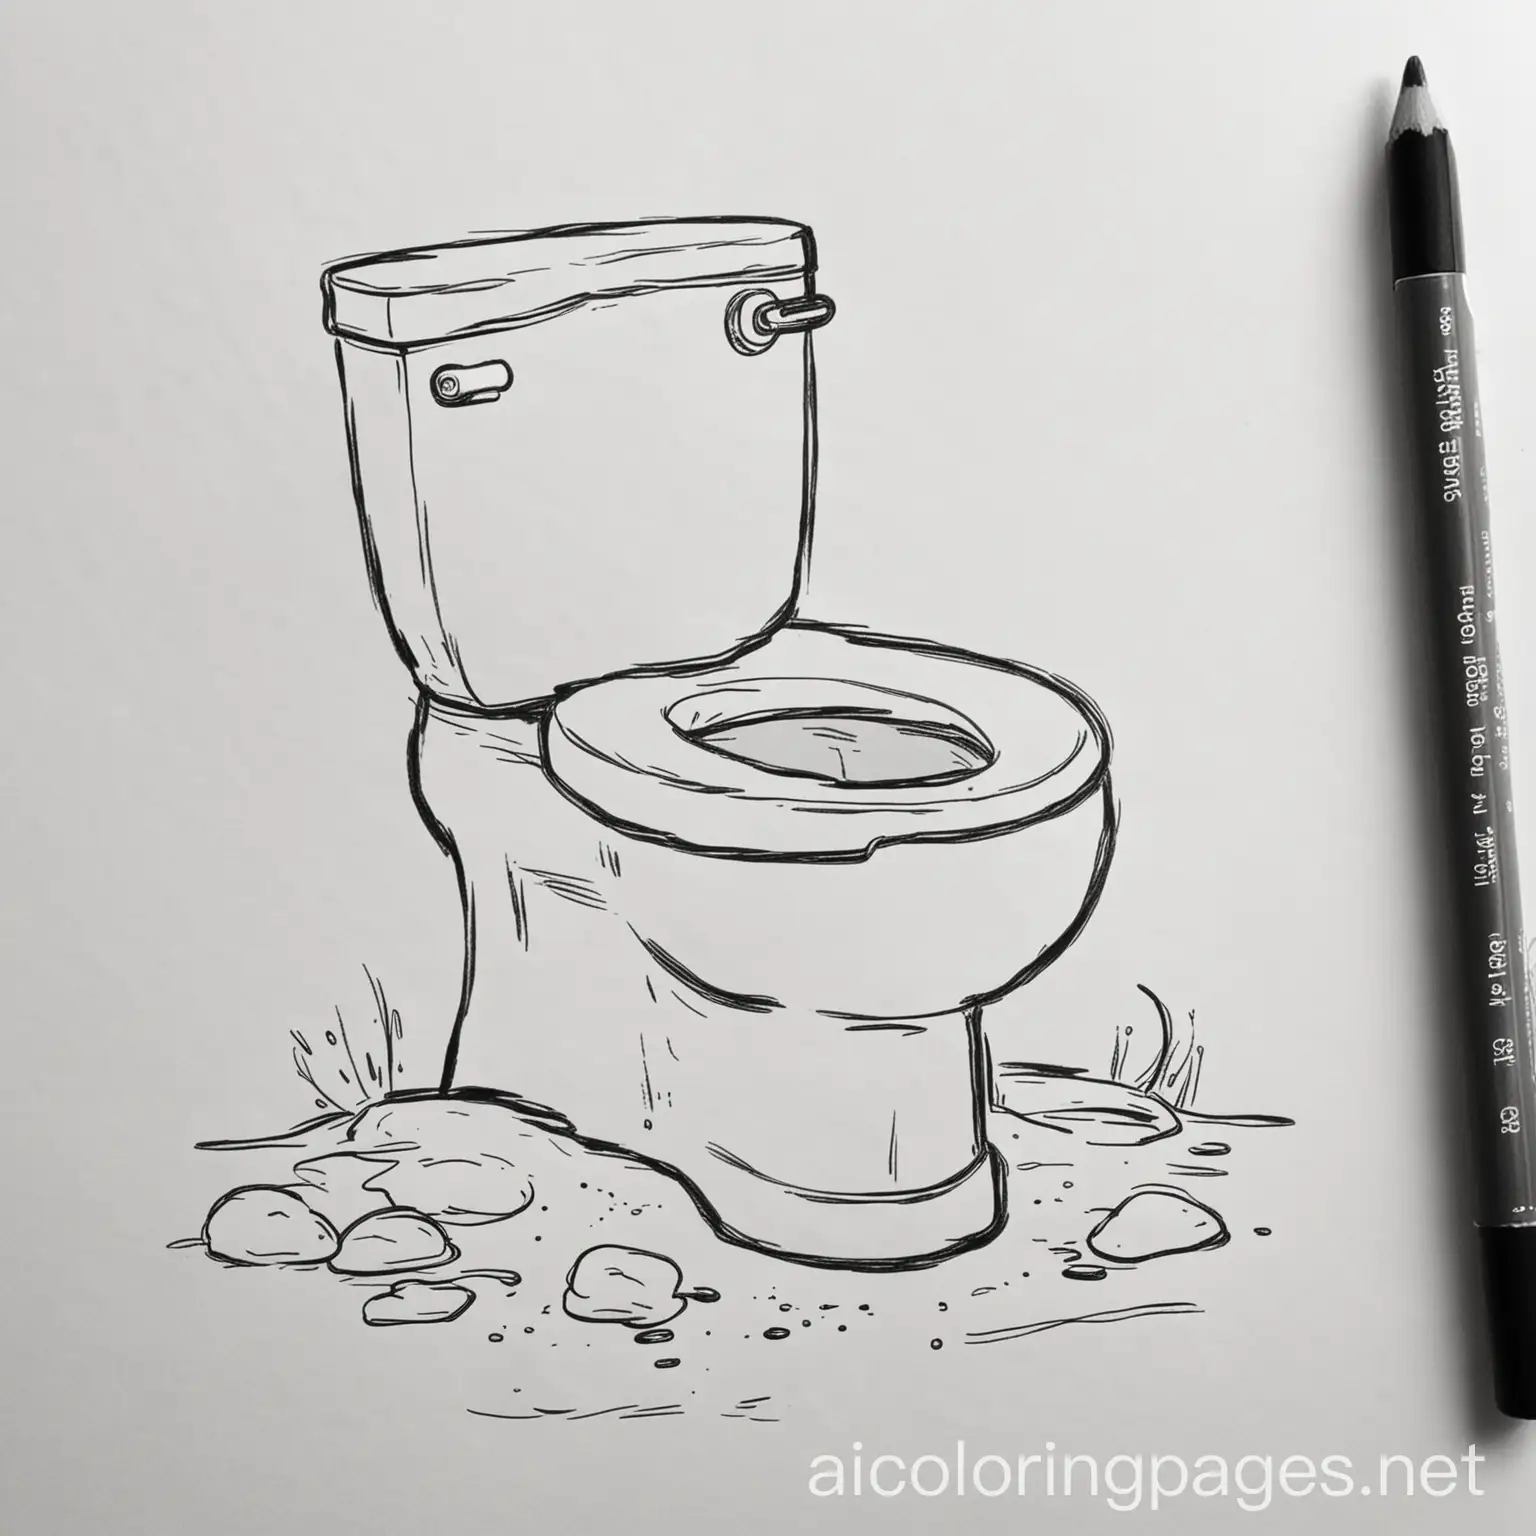 An uncoloured white drawing of a potty with next to it a little turd, diarrhea, pee and lines of a fart. , Coloring Page, black and white, line art, white background, Simplicity, Ample White Space. The background of the coloring page is plain white to make it easy for young children to color within the lines. The outlines of all the subjects are easy to distinguish, making it simple for kids to color without too much difficulty